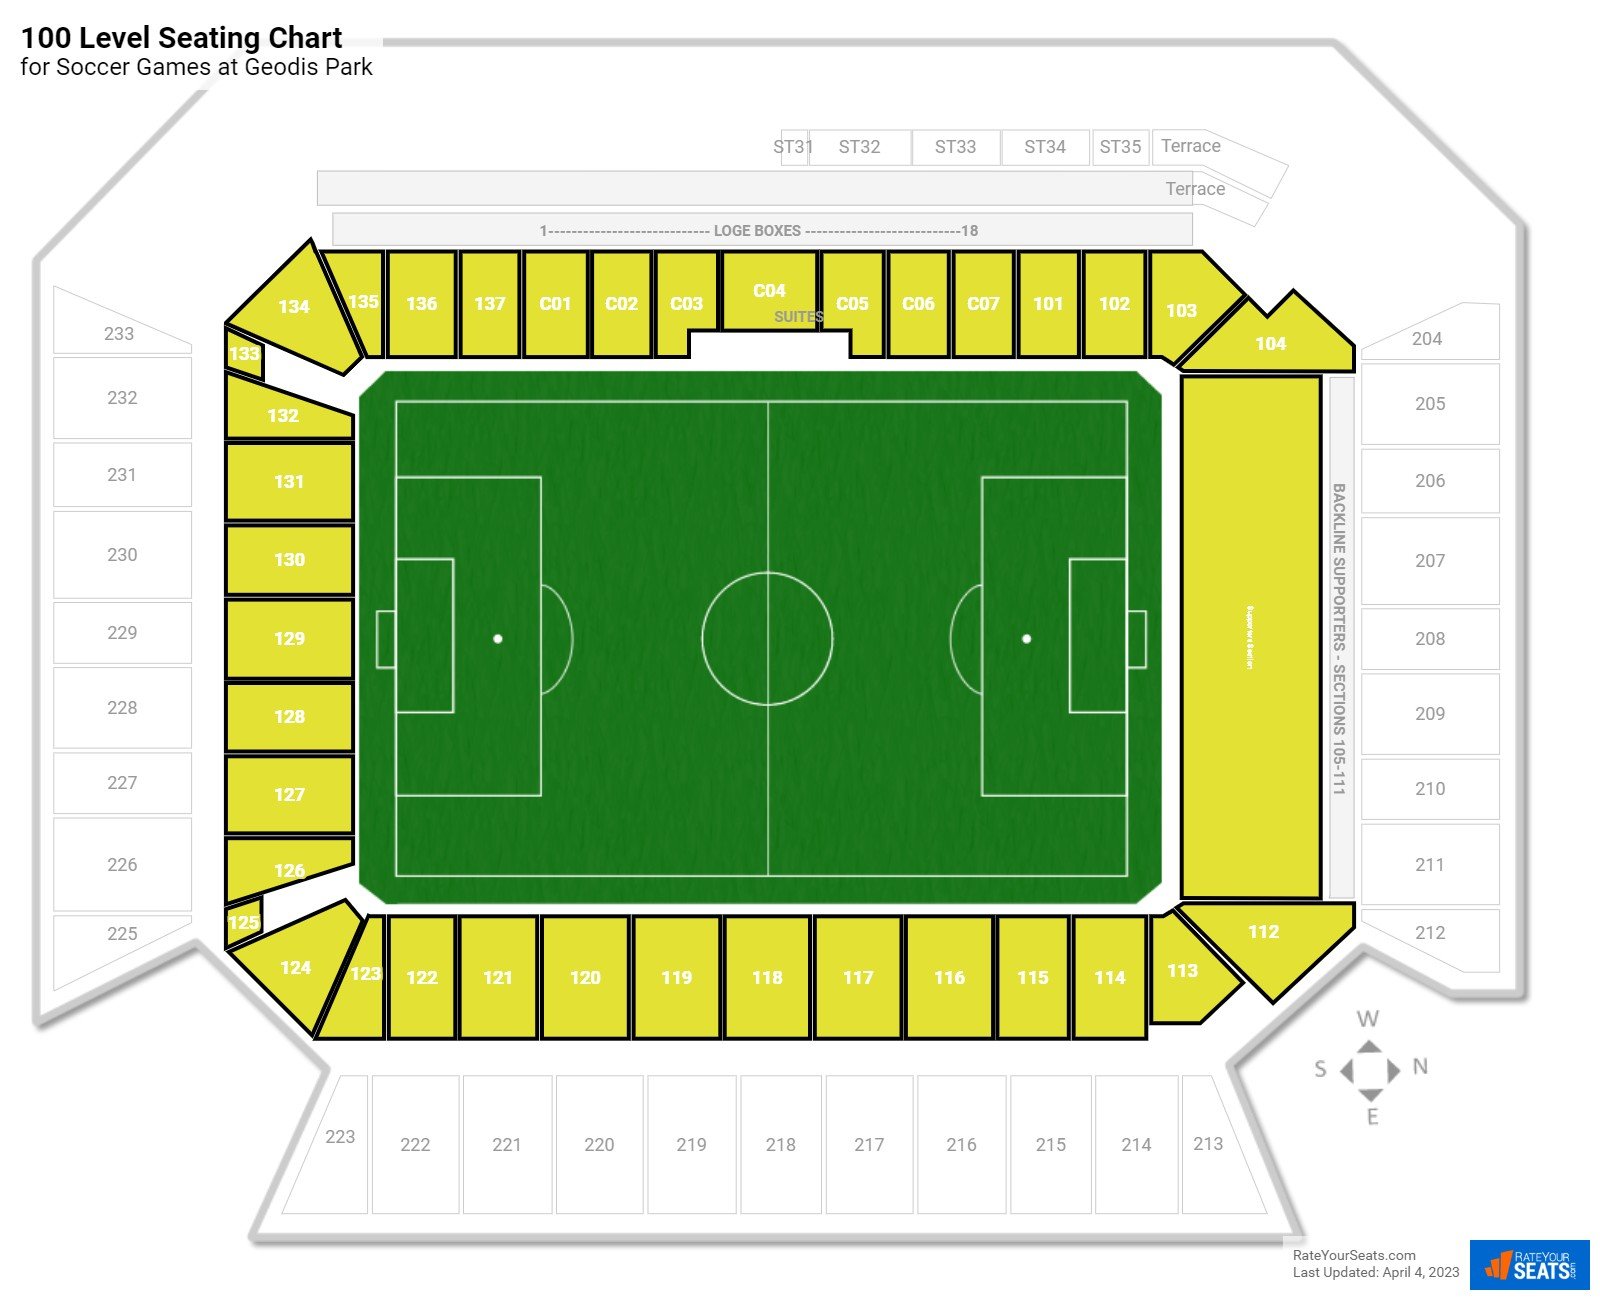 Soccer 100 Level Seating Chart at Geodis Park